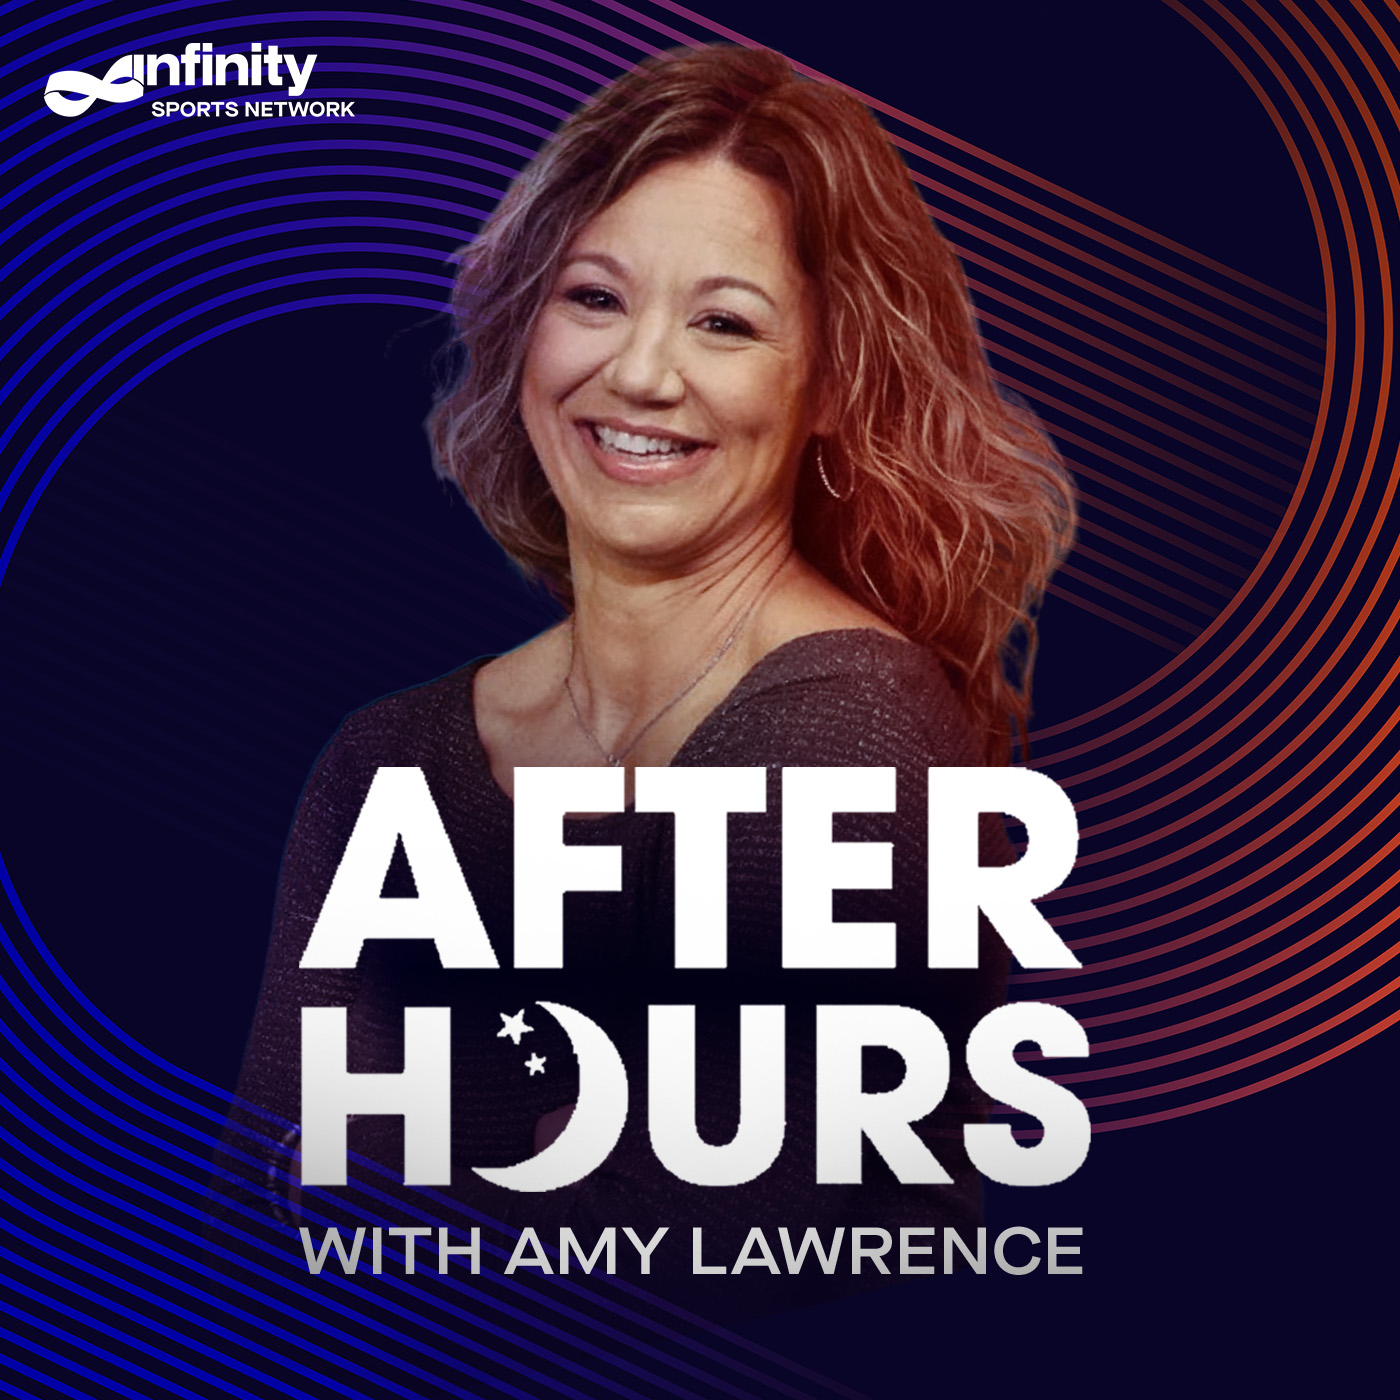 10-21-21 After Hours with Amy Lawrence PODCAST: Hour 2